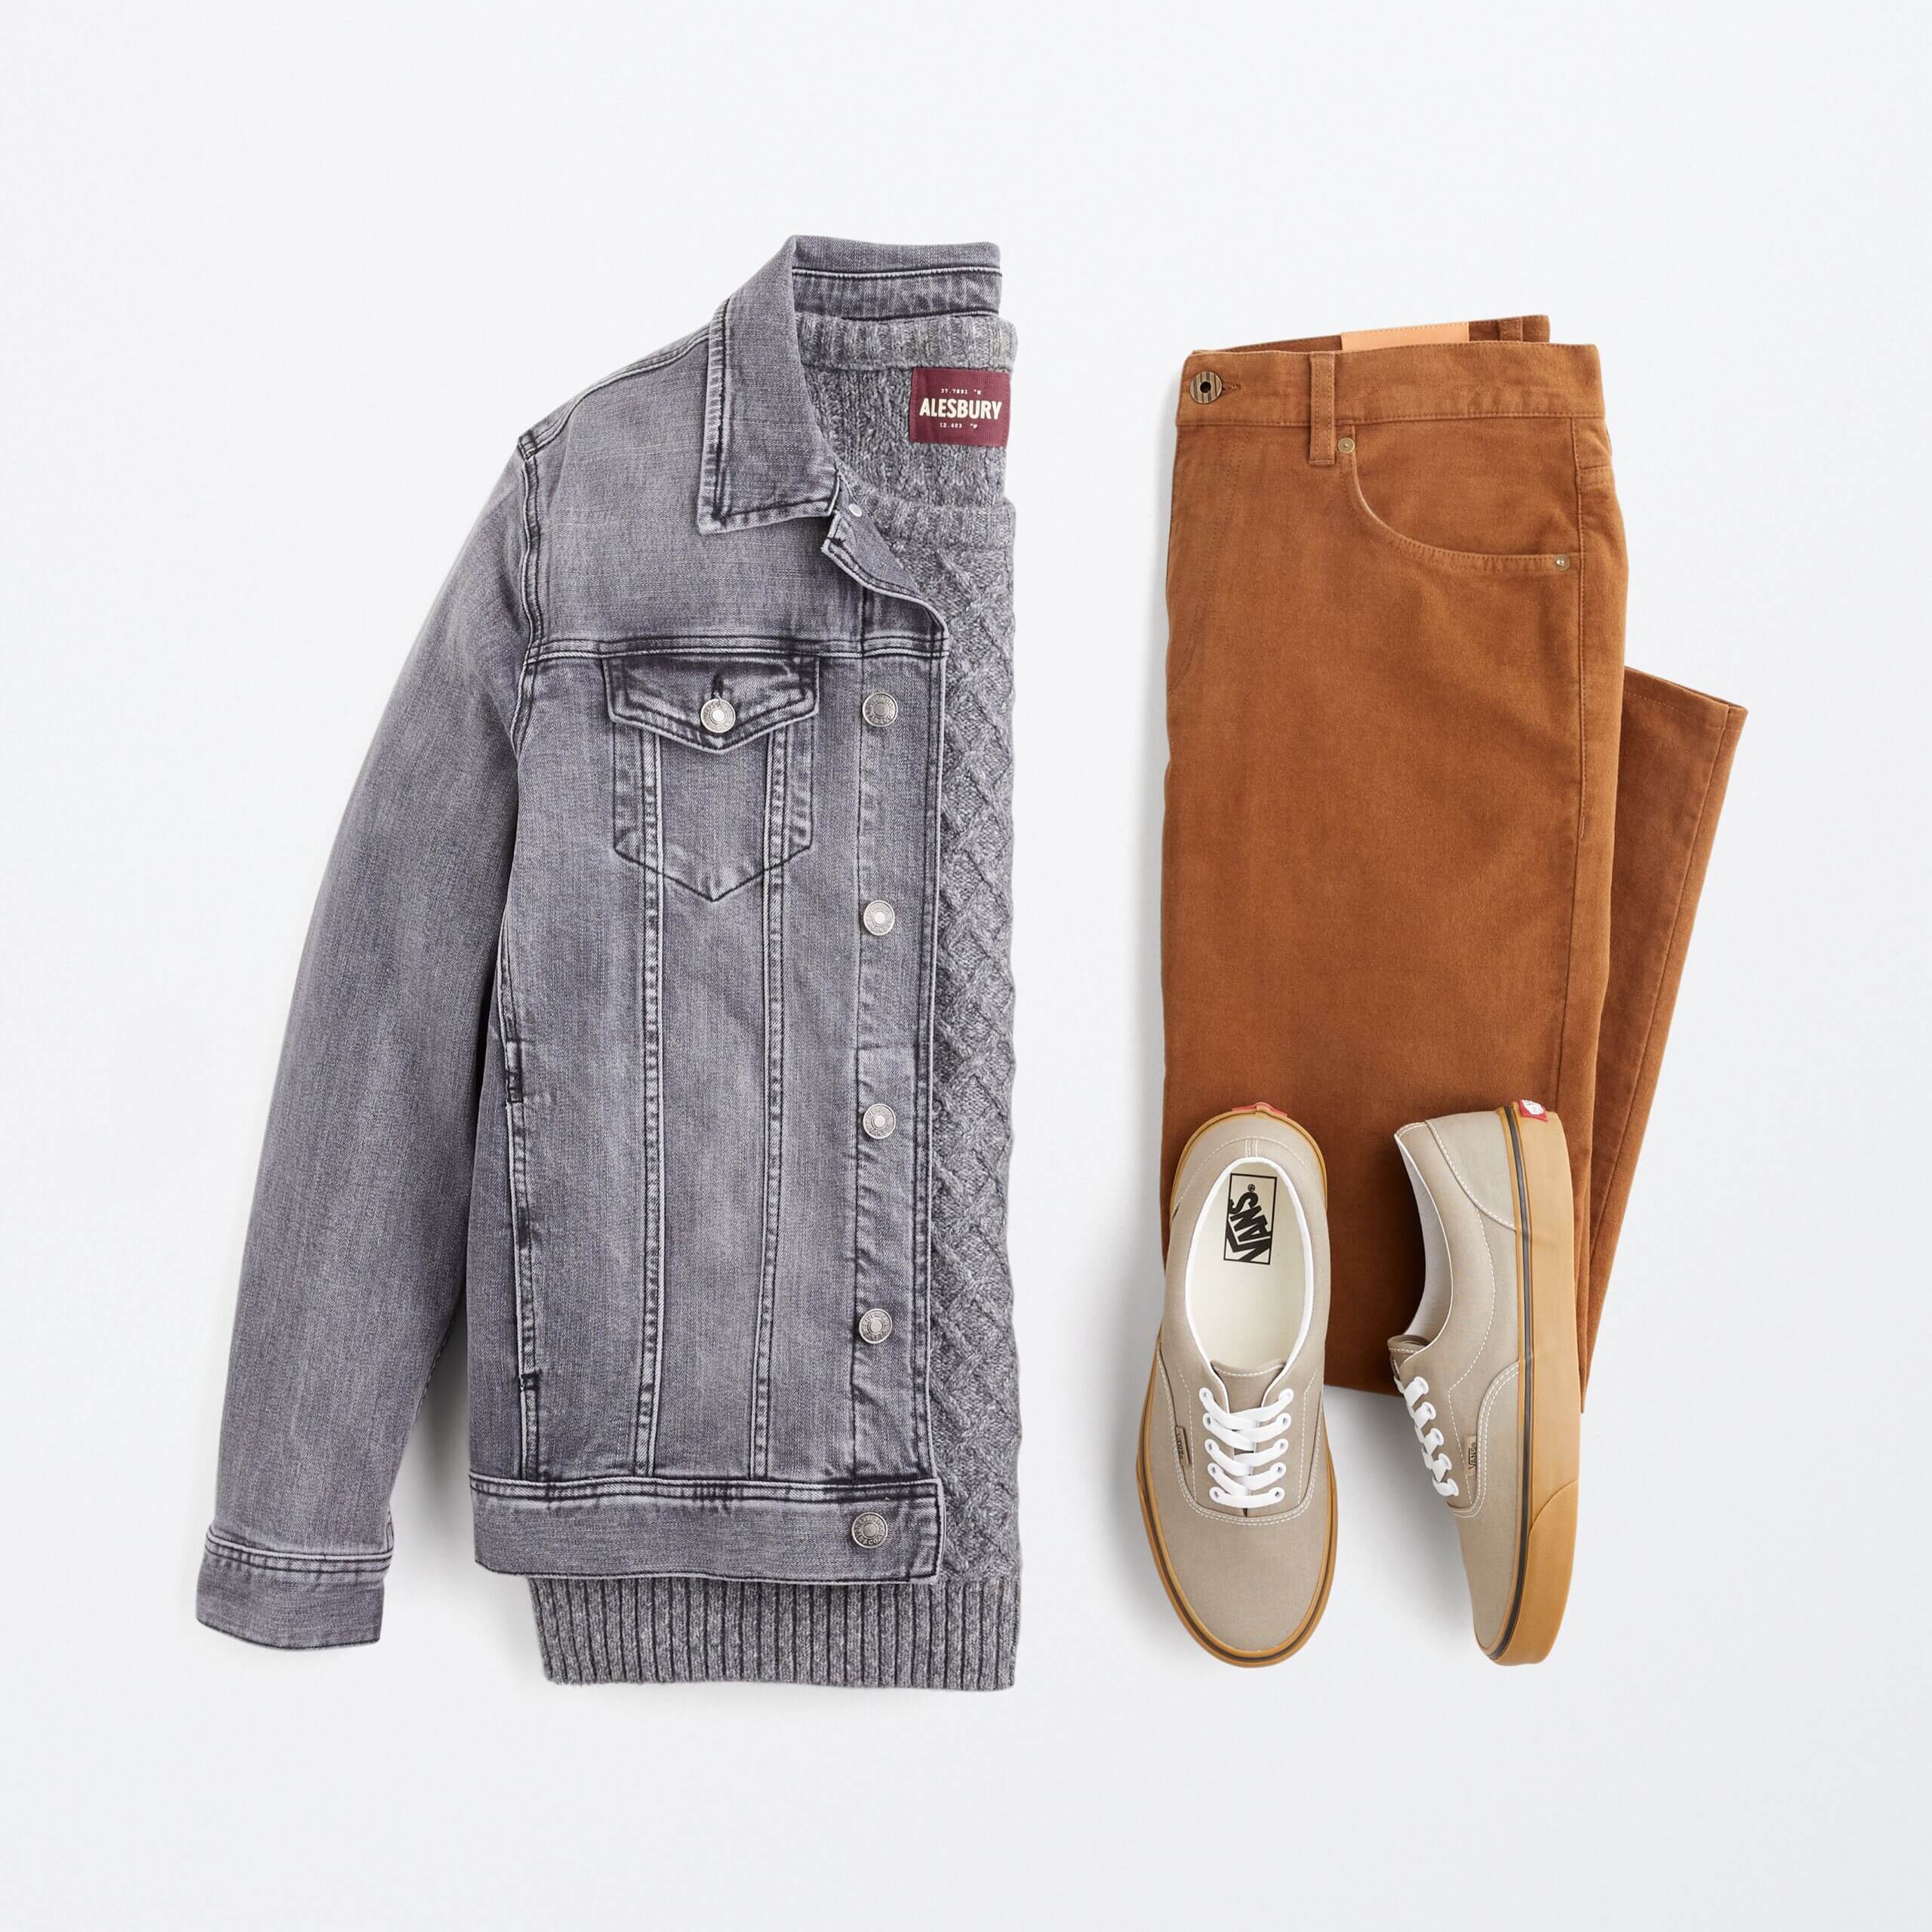 Stitch Fix men’s big and tall outfit with grey cable-knit sweater, grey denim jacket, brown cords and grey sneakers.